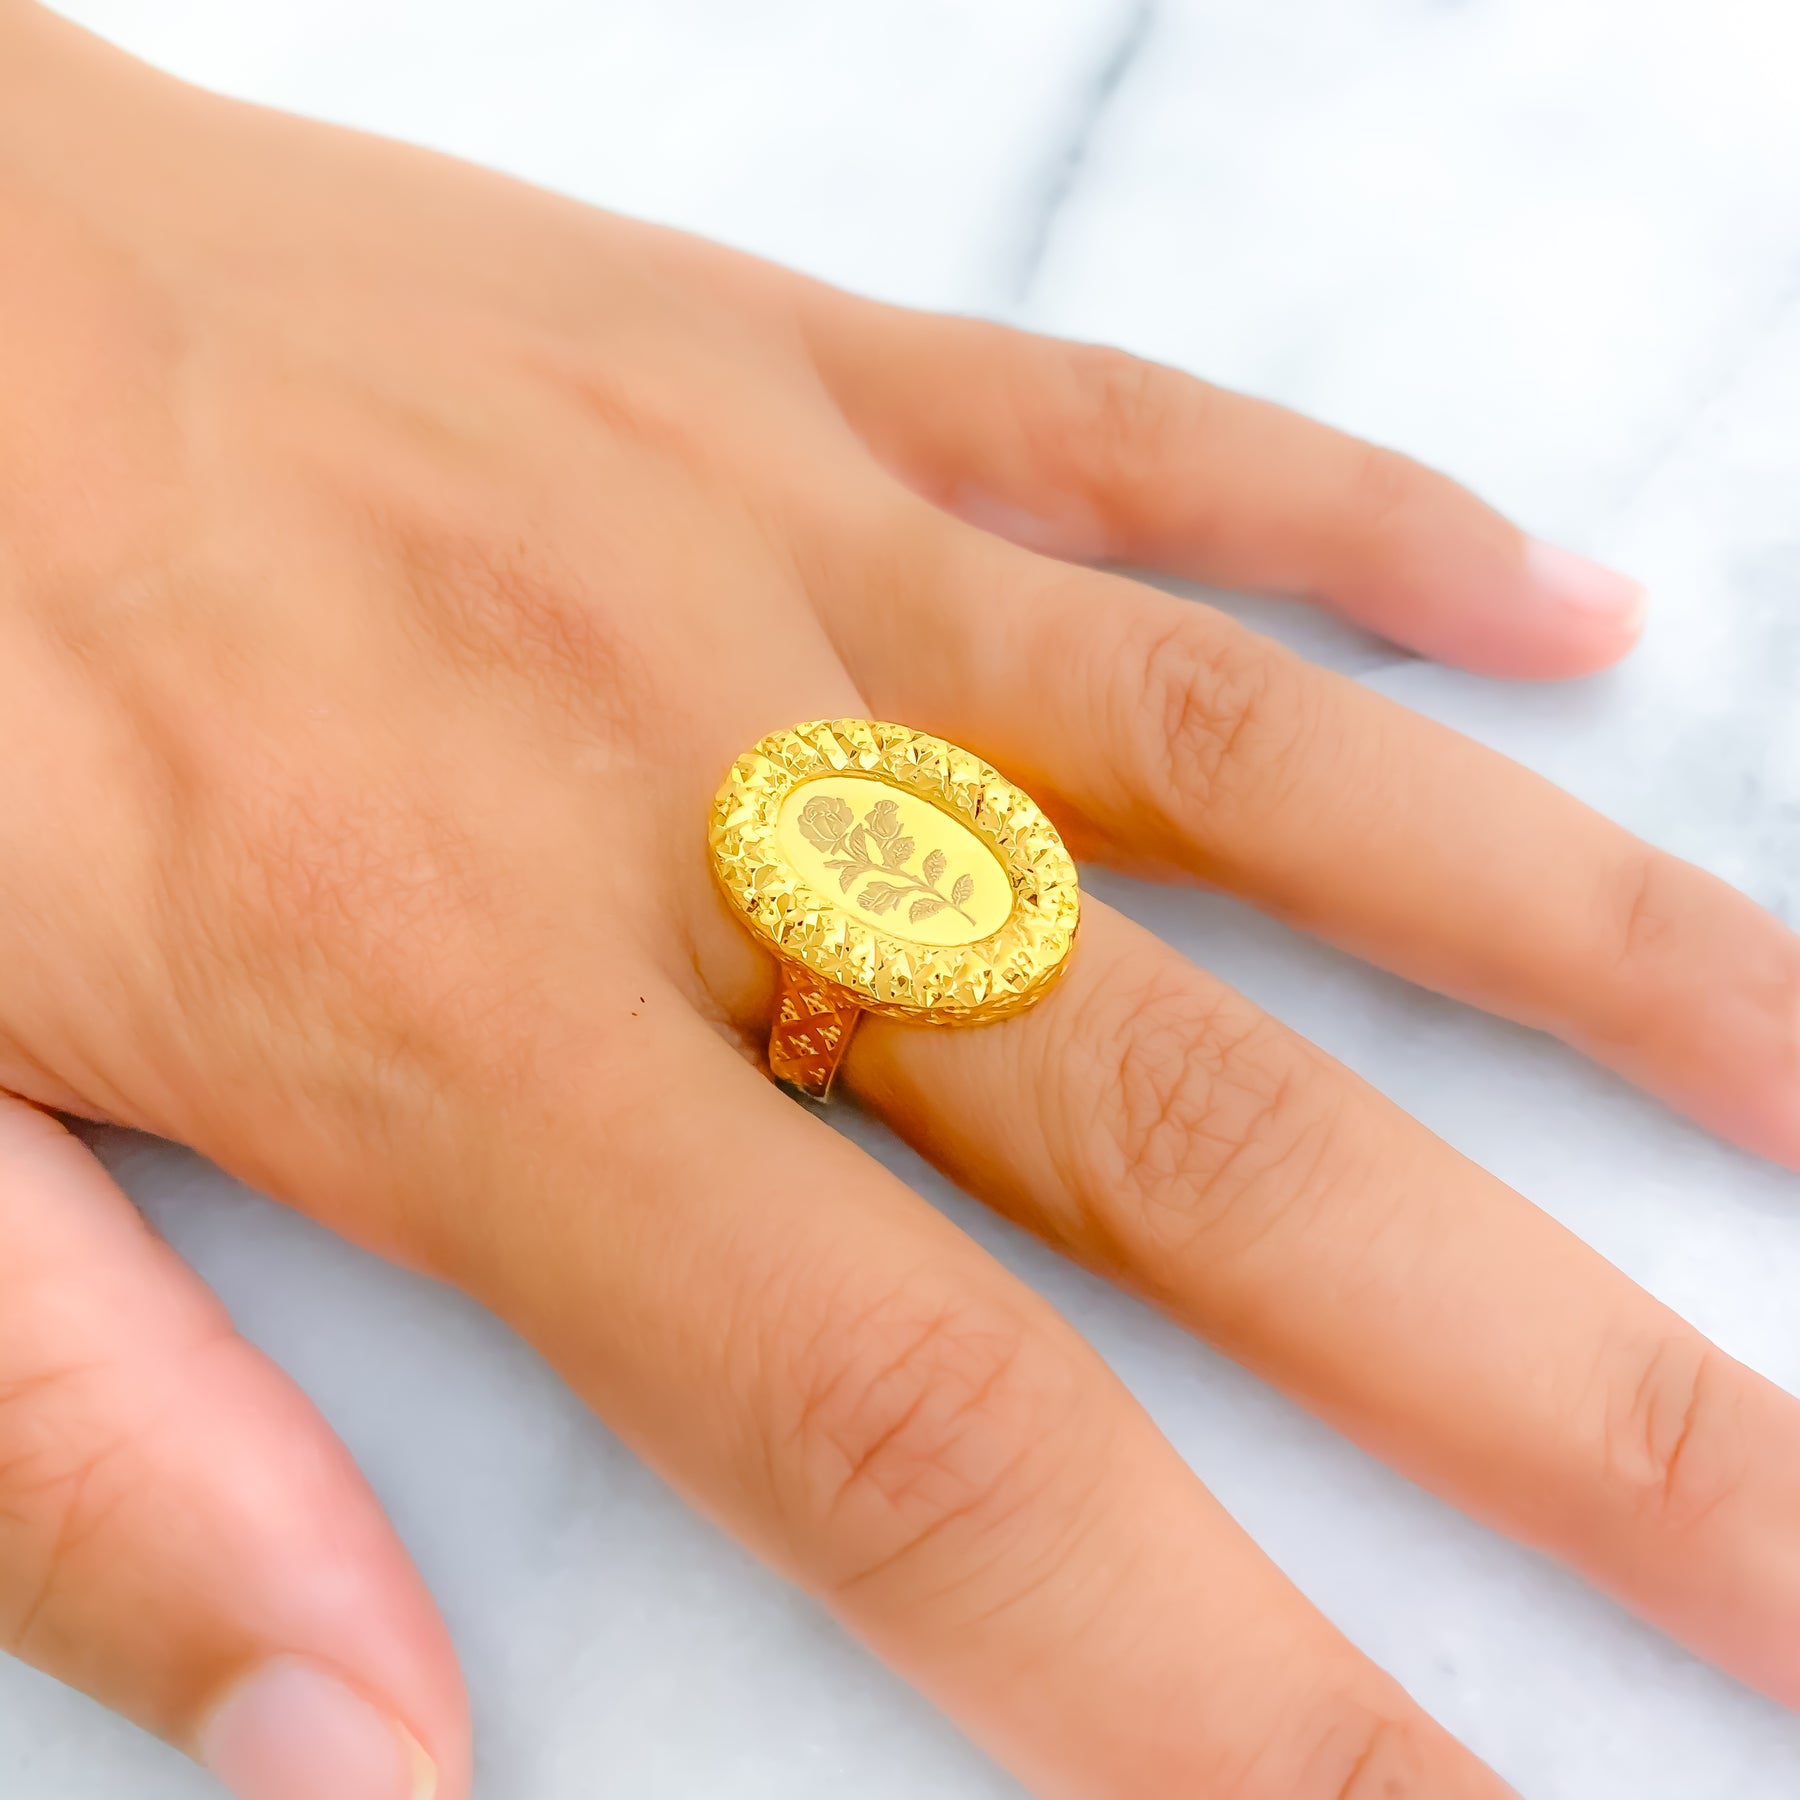 Amazon.com: Caprixus 925 Sterling Silver Two Tone Honey Bee 24K Yellow Gold  Vermeil Ancient Bumblebee Signet Coin Ring Hammered Rings for Women  Designer Fine Jewelry (US 11.75) : Handmade Products